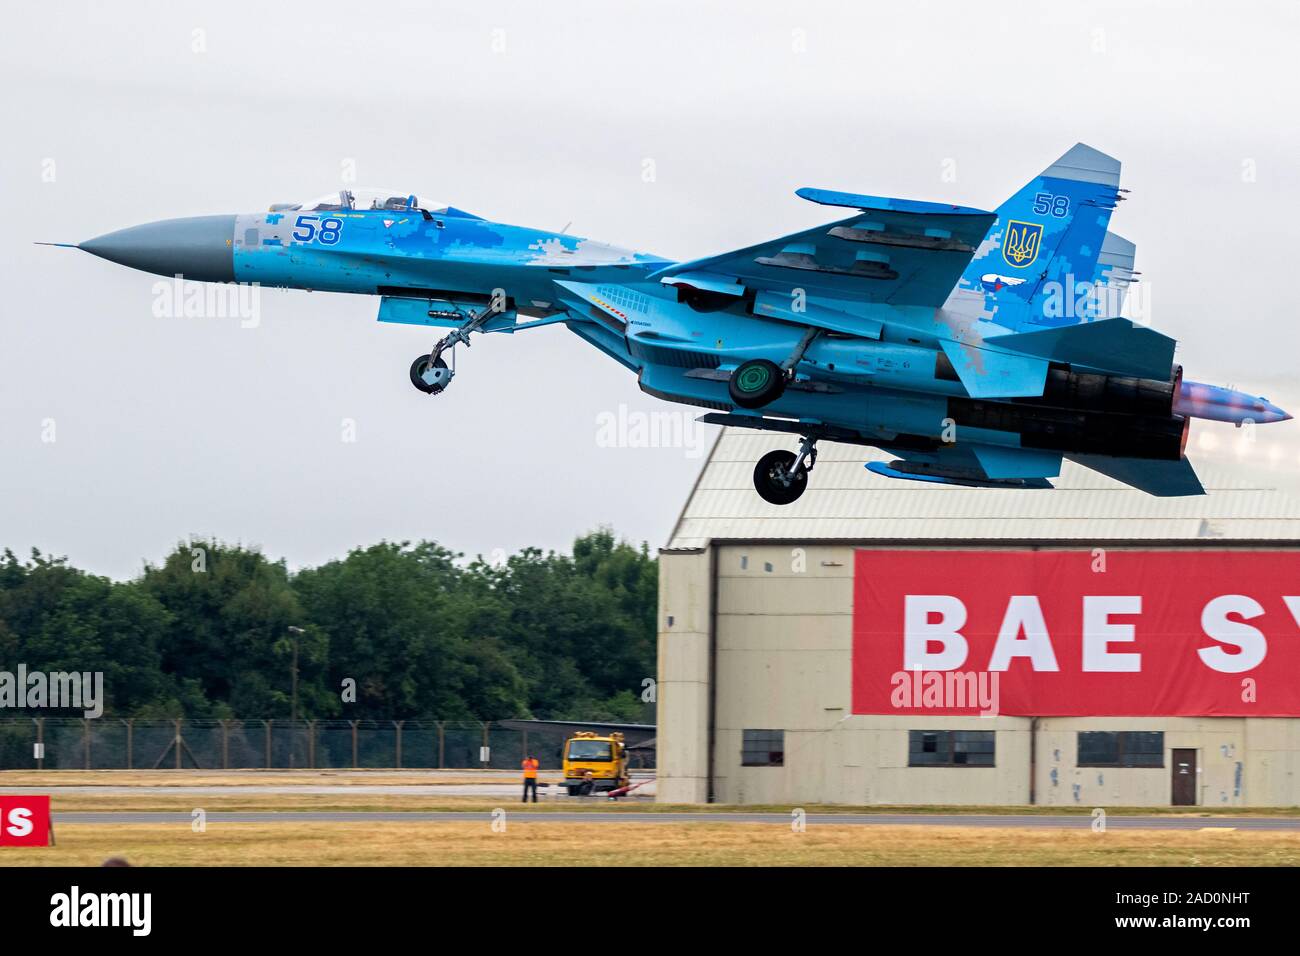 FAIRFORD, UK - JUL 13, 2018: Ukrainian Air Force Sukhoi Su-27 fighter jet plane take off from RAF Fairford airbase. Stock Photo